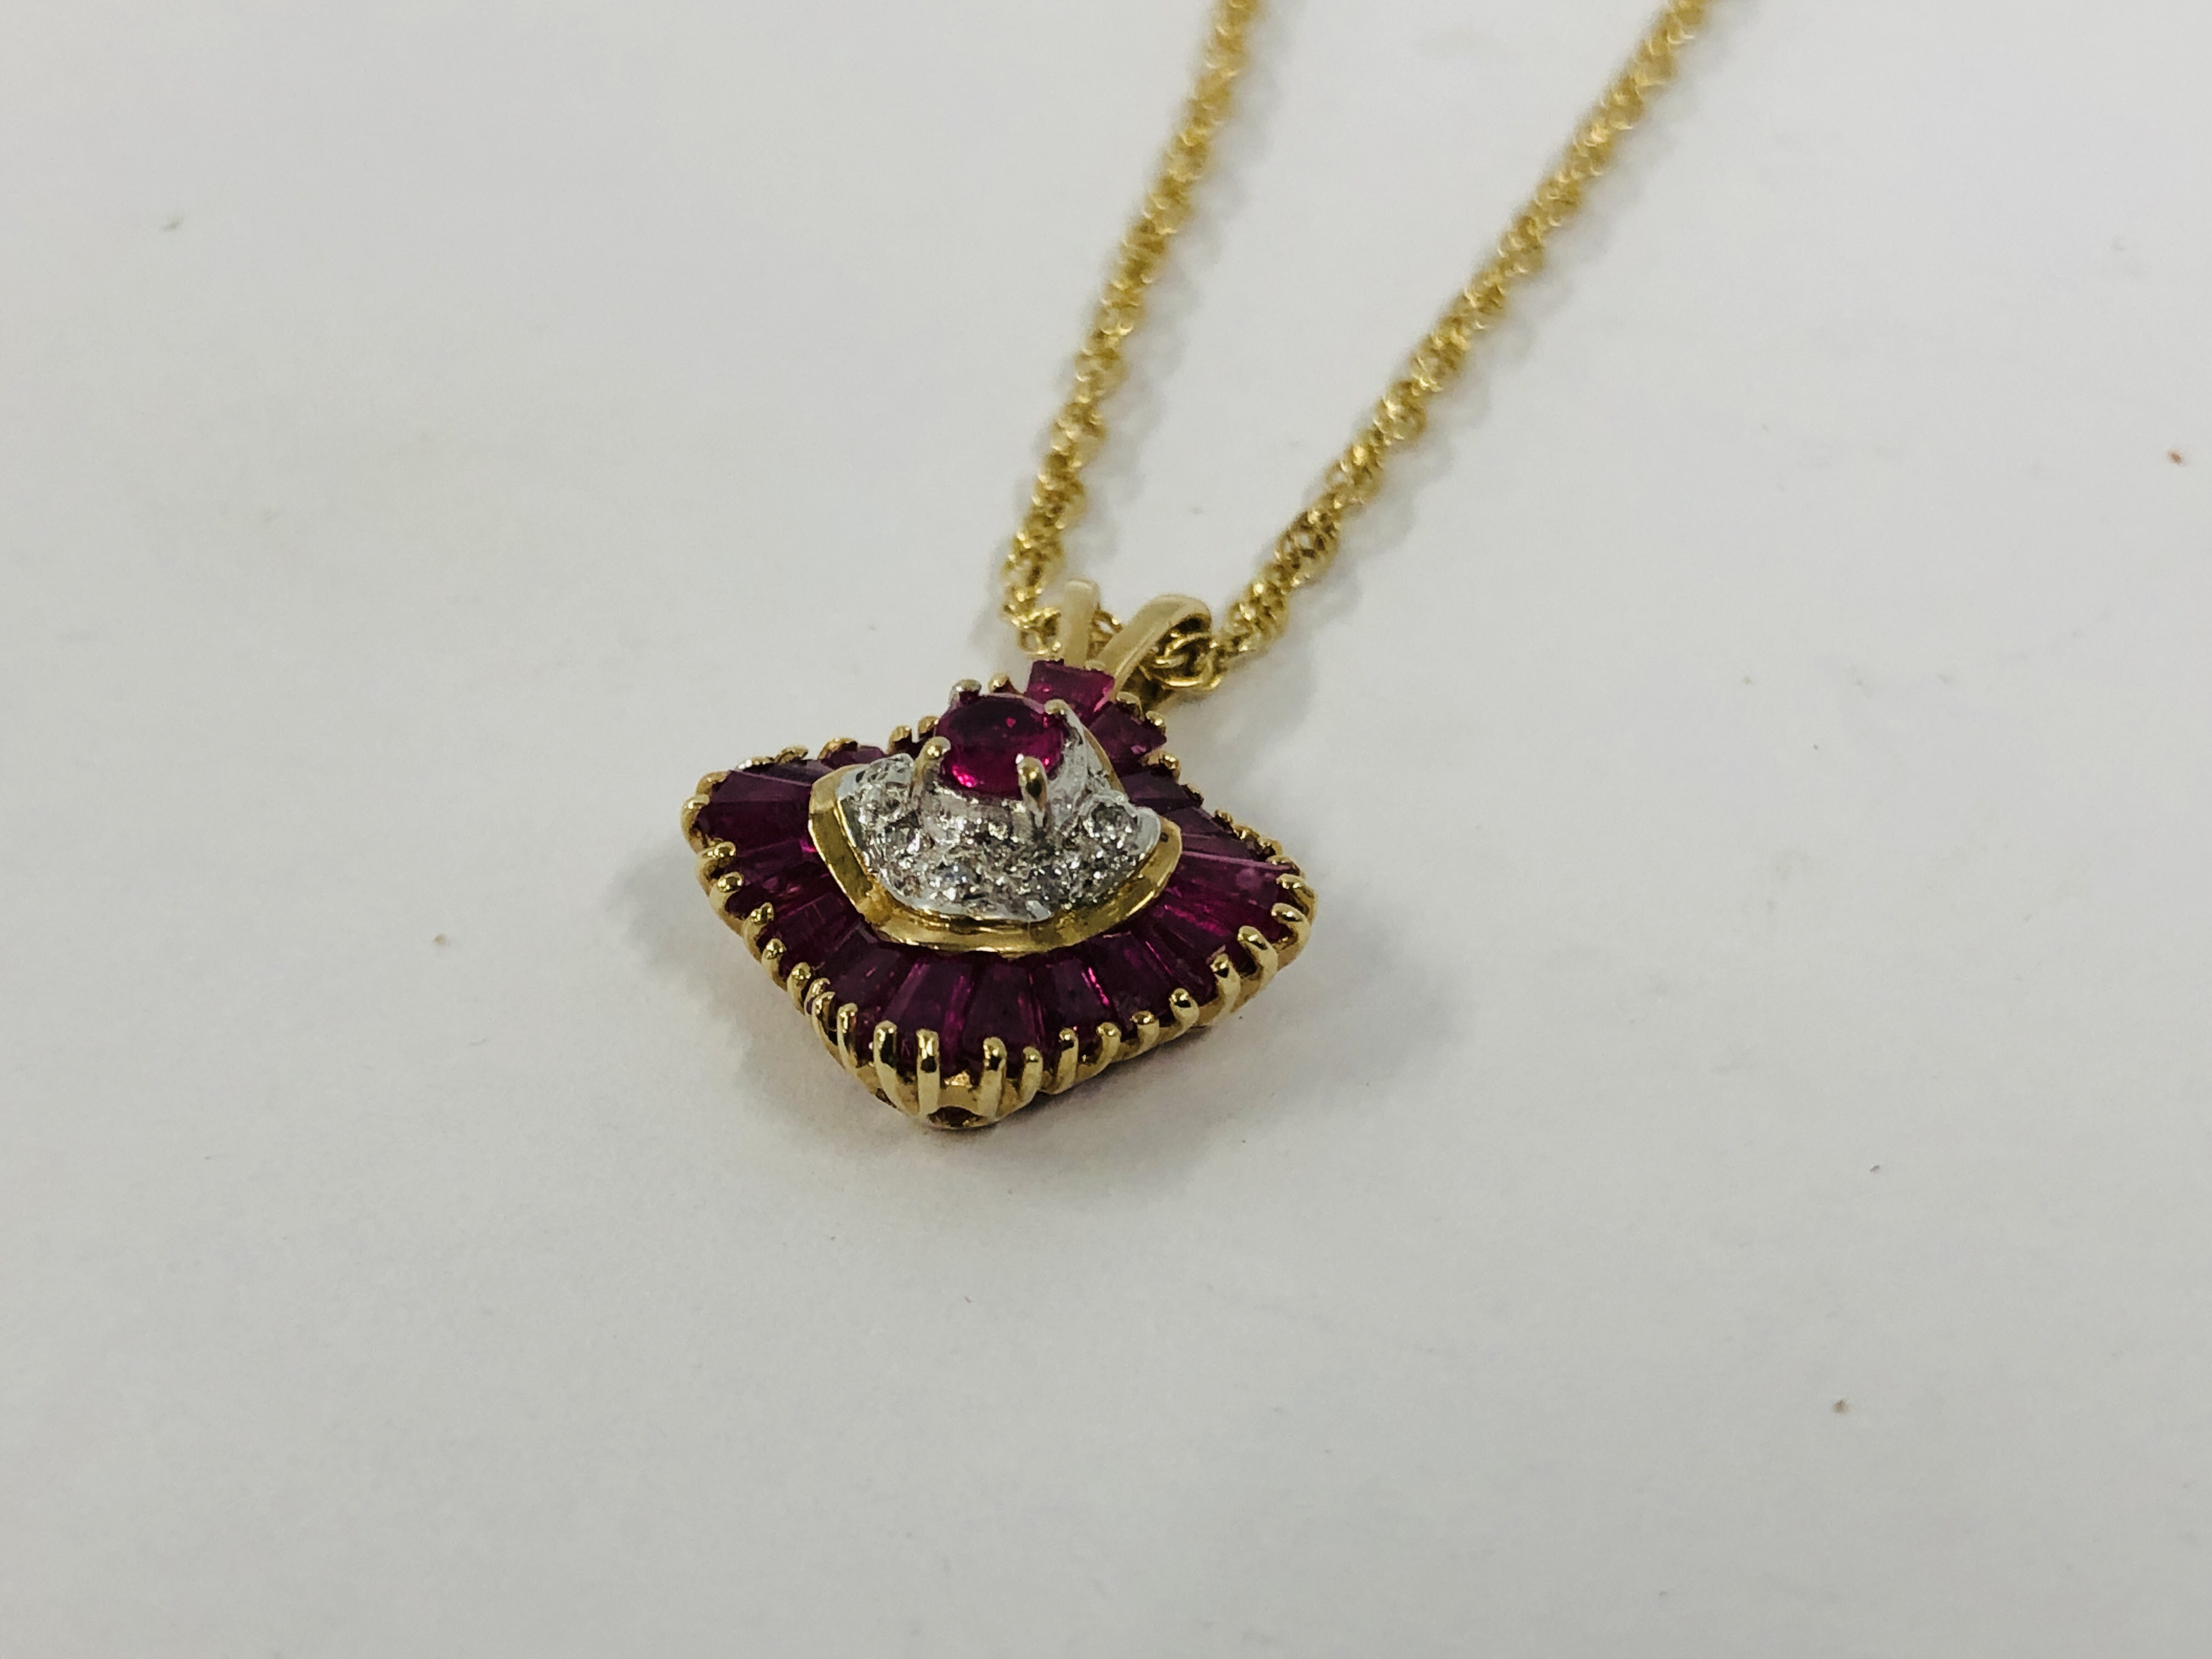 AN ORNATE PENDANT SET WITH MAINLY PINK STONE ON A FINE INTERTWINED 9CT GOLD CHAIN.